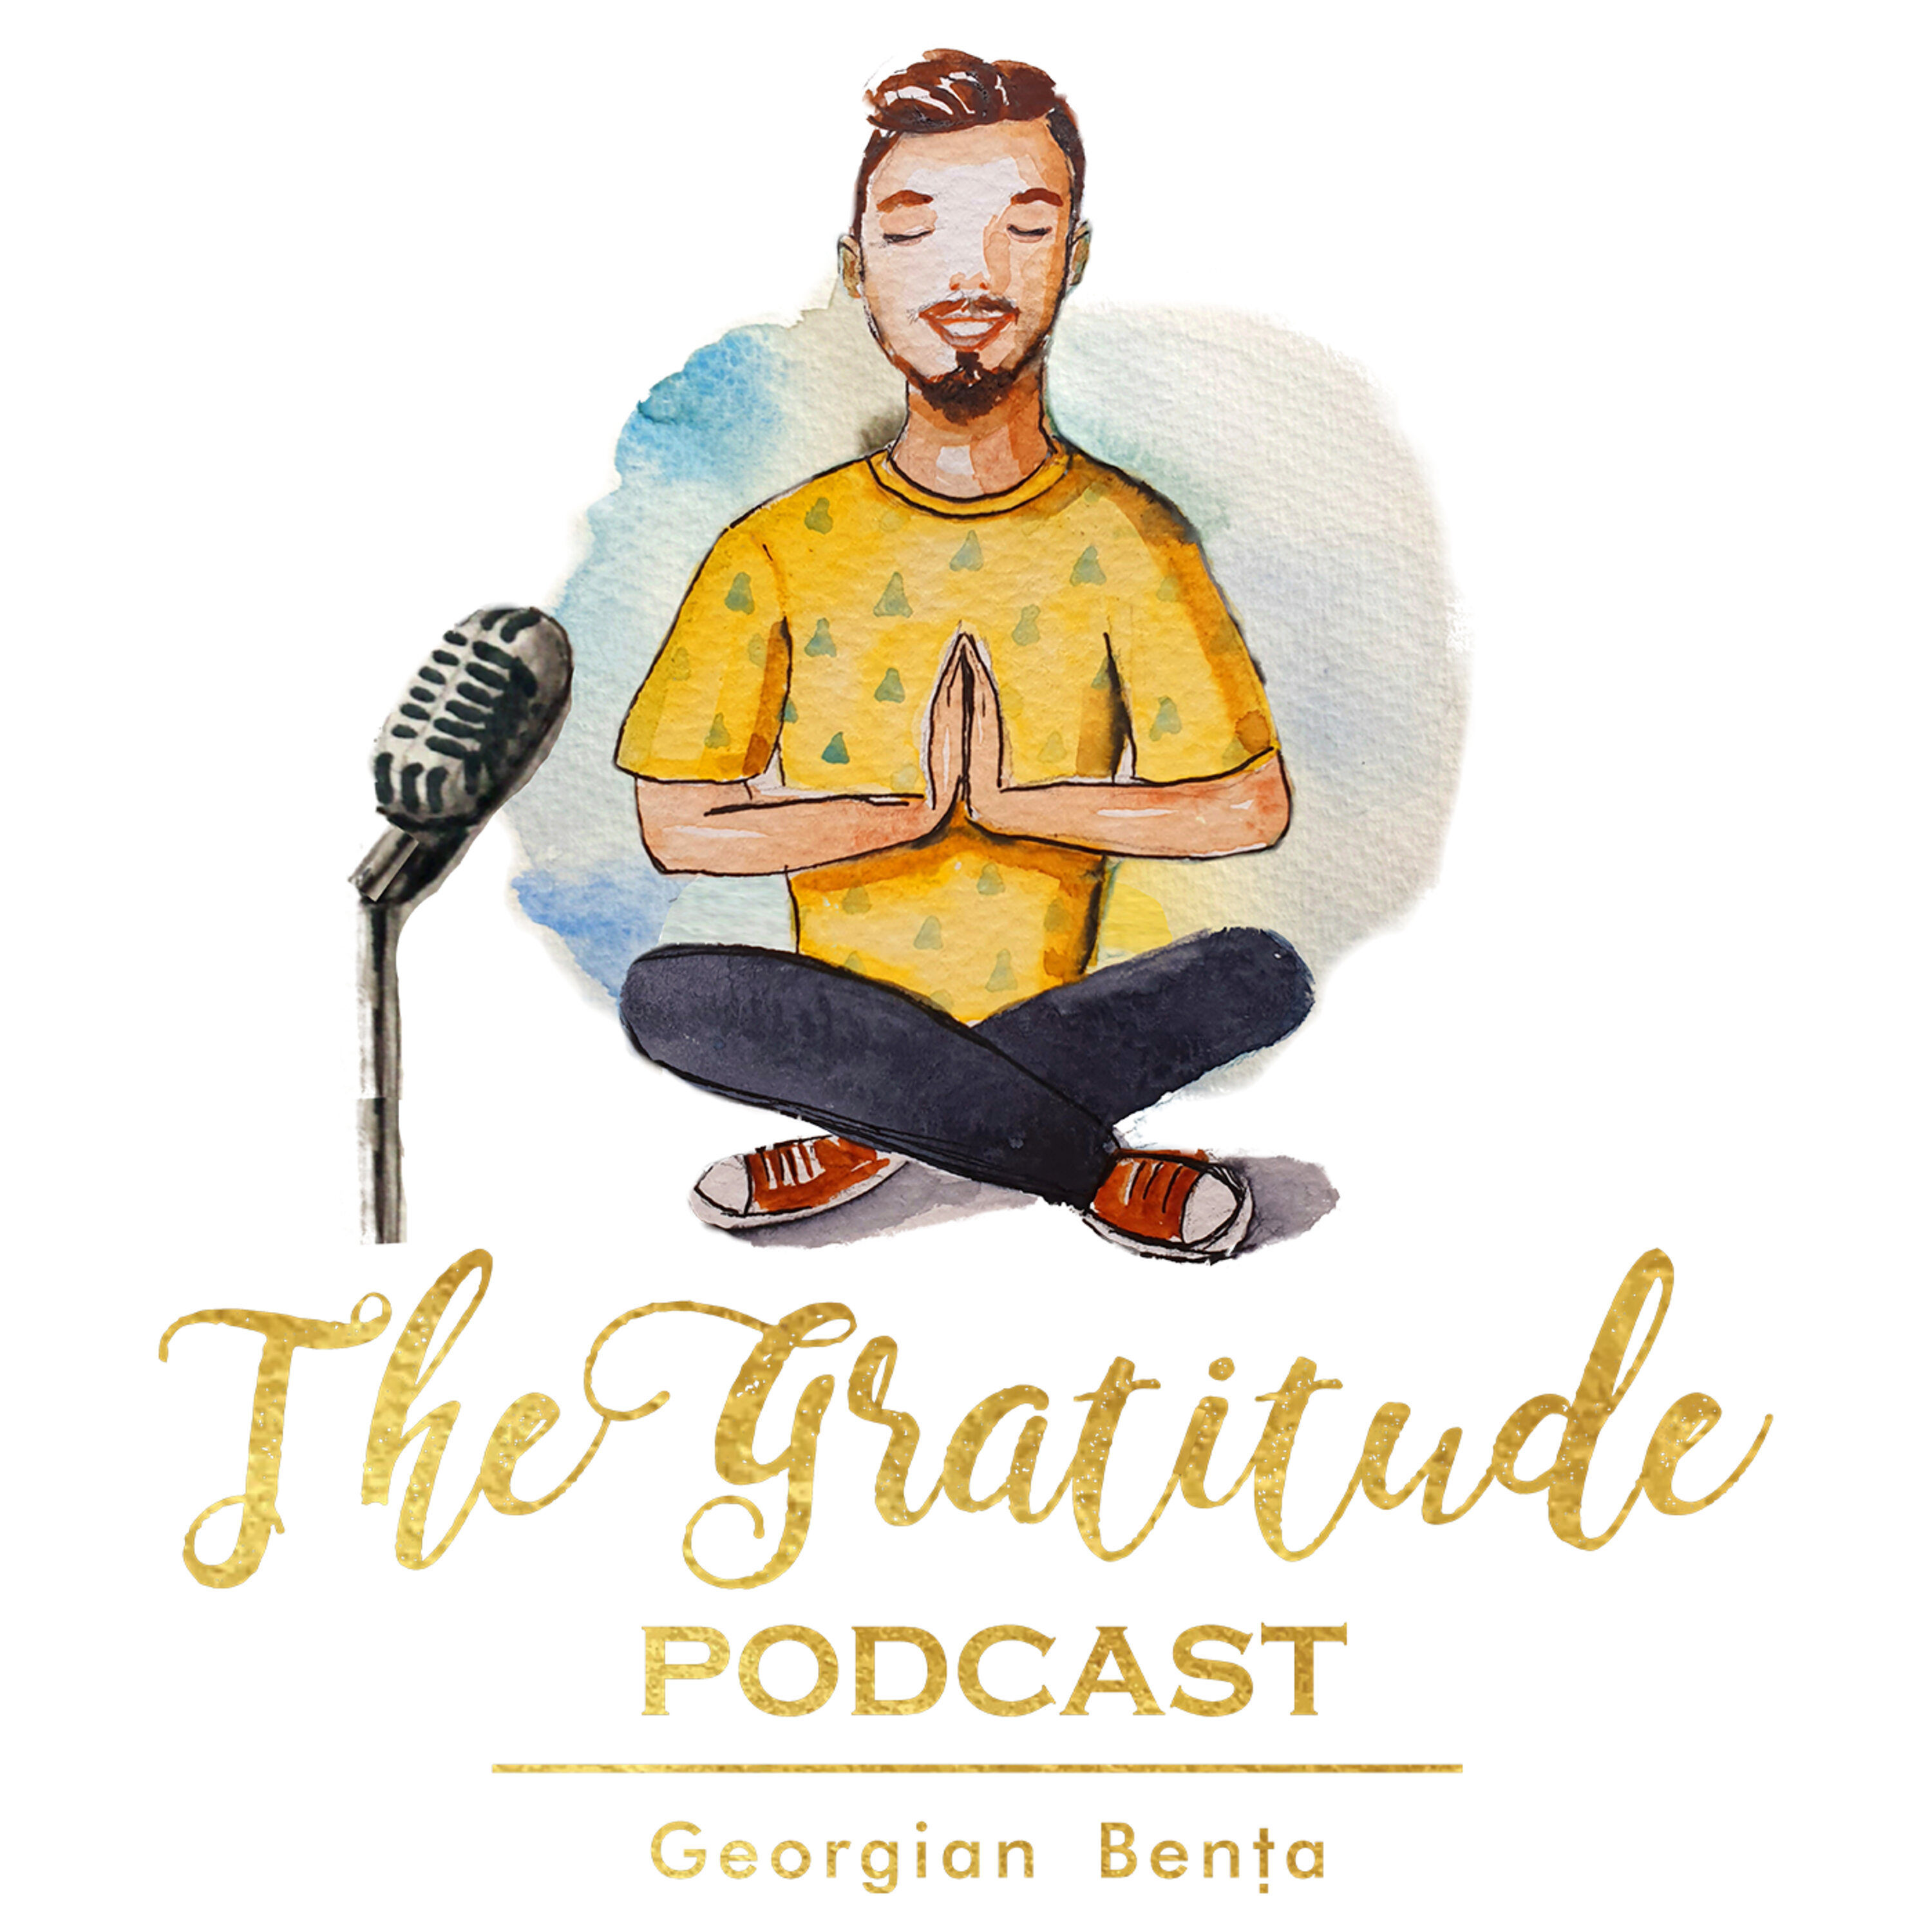 Gratitude Doesn’t Have To Be Hard - Udo Erasmus (ep. 687)